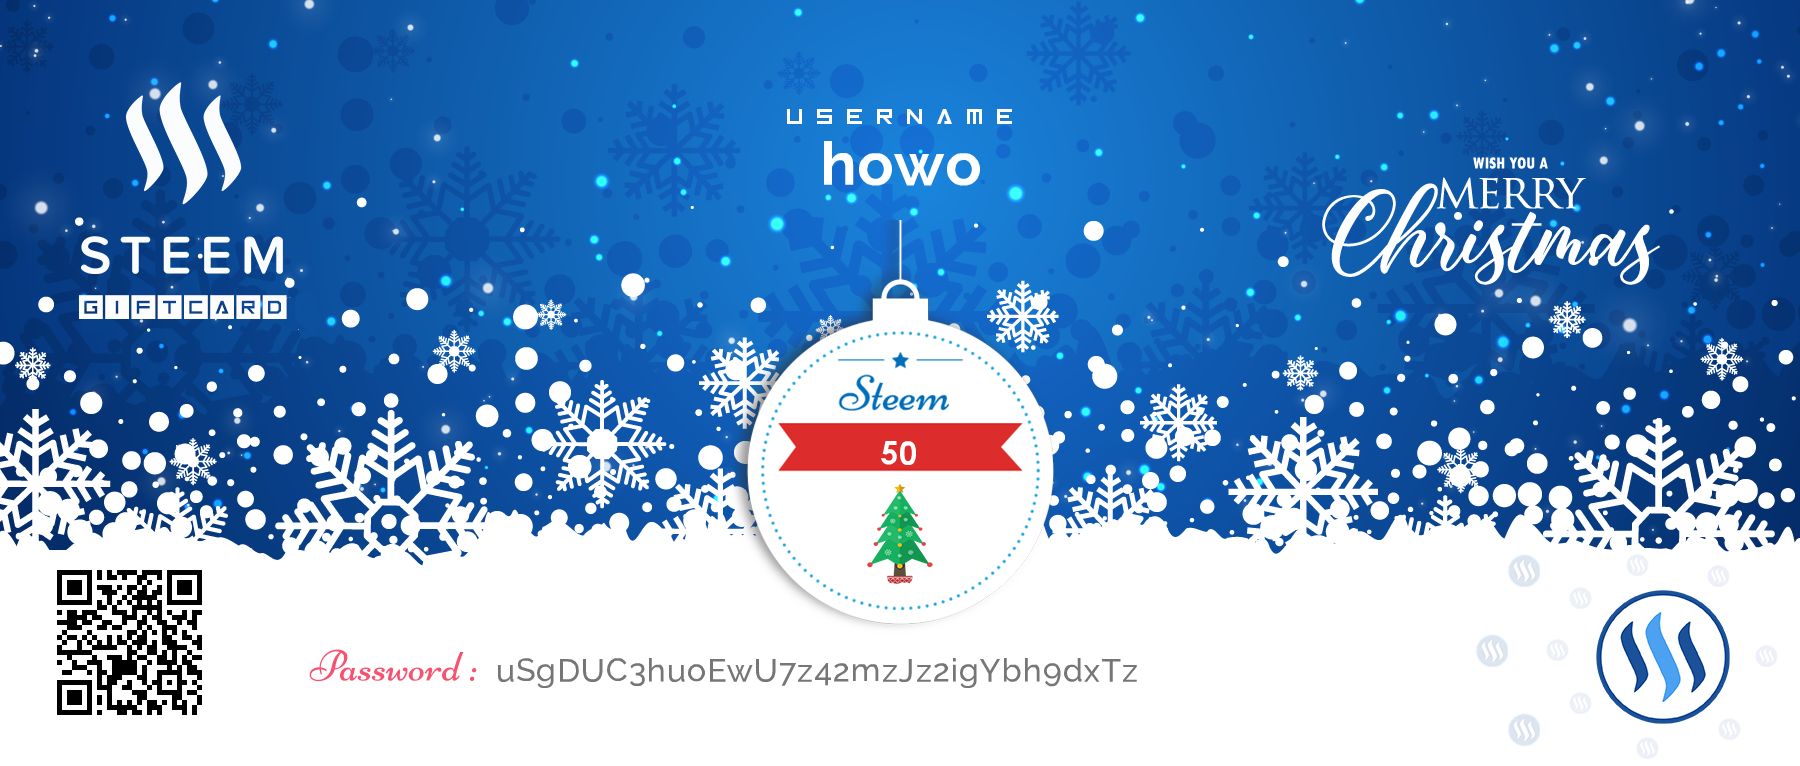 steem gift card christmas edition.png